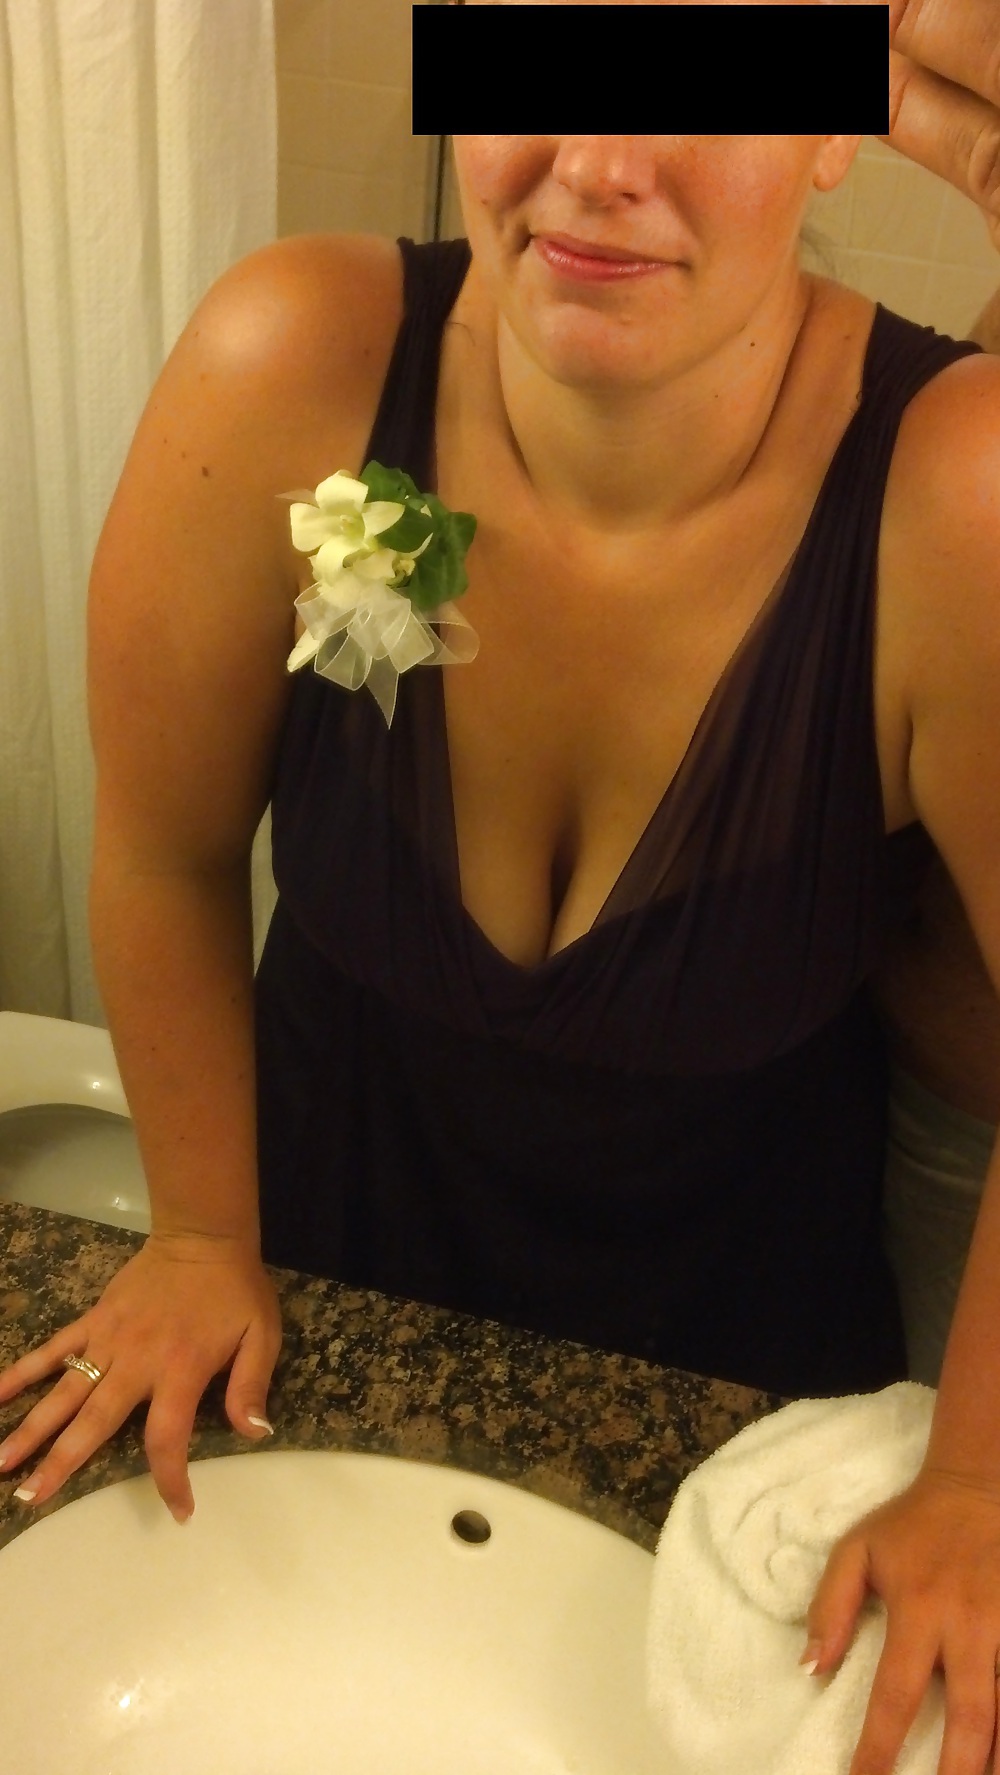 Wife being riskay at friends wedding #13921621